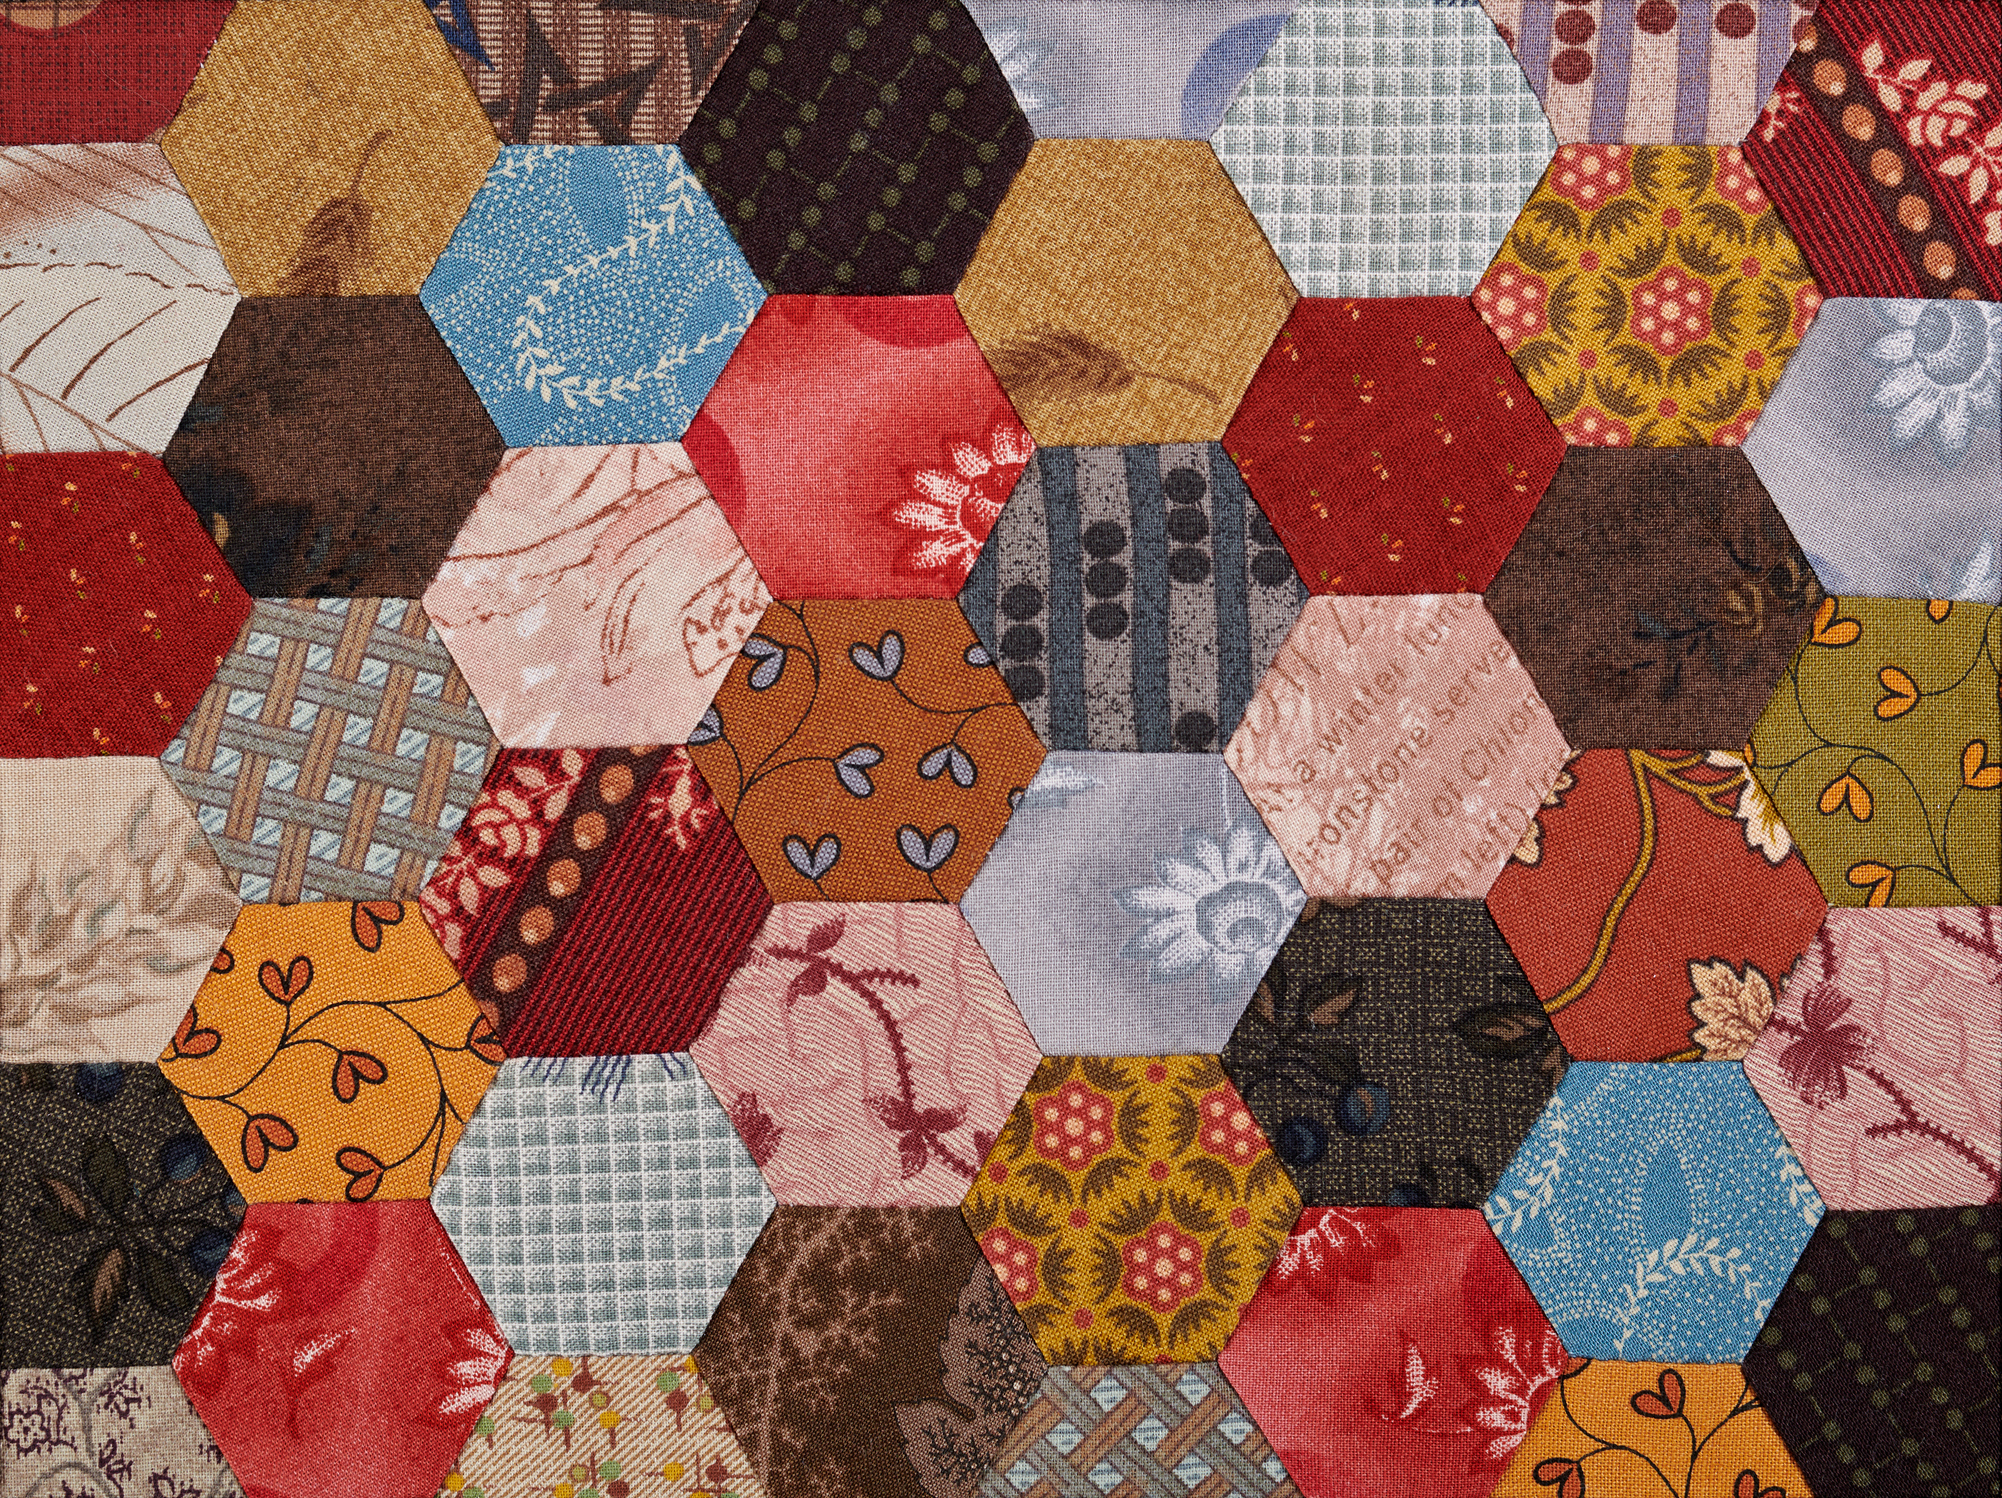 Learn all about quilts, hexagonal patterns and more this week.